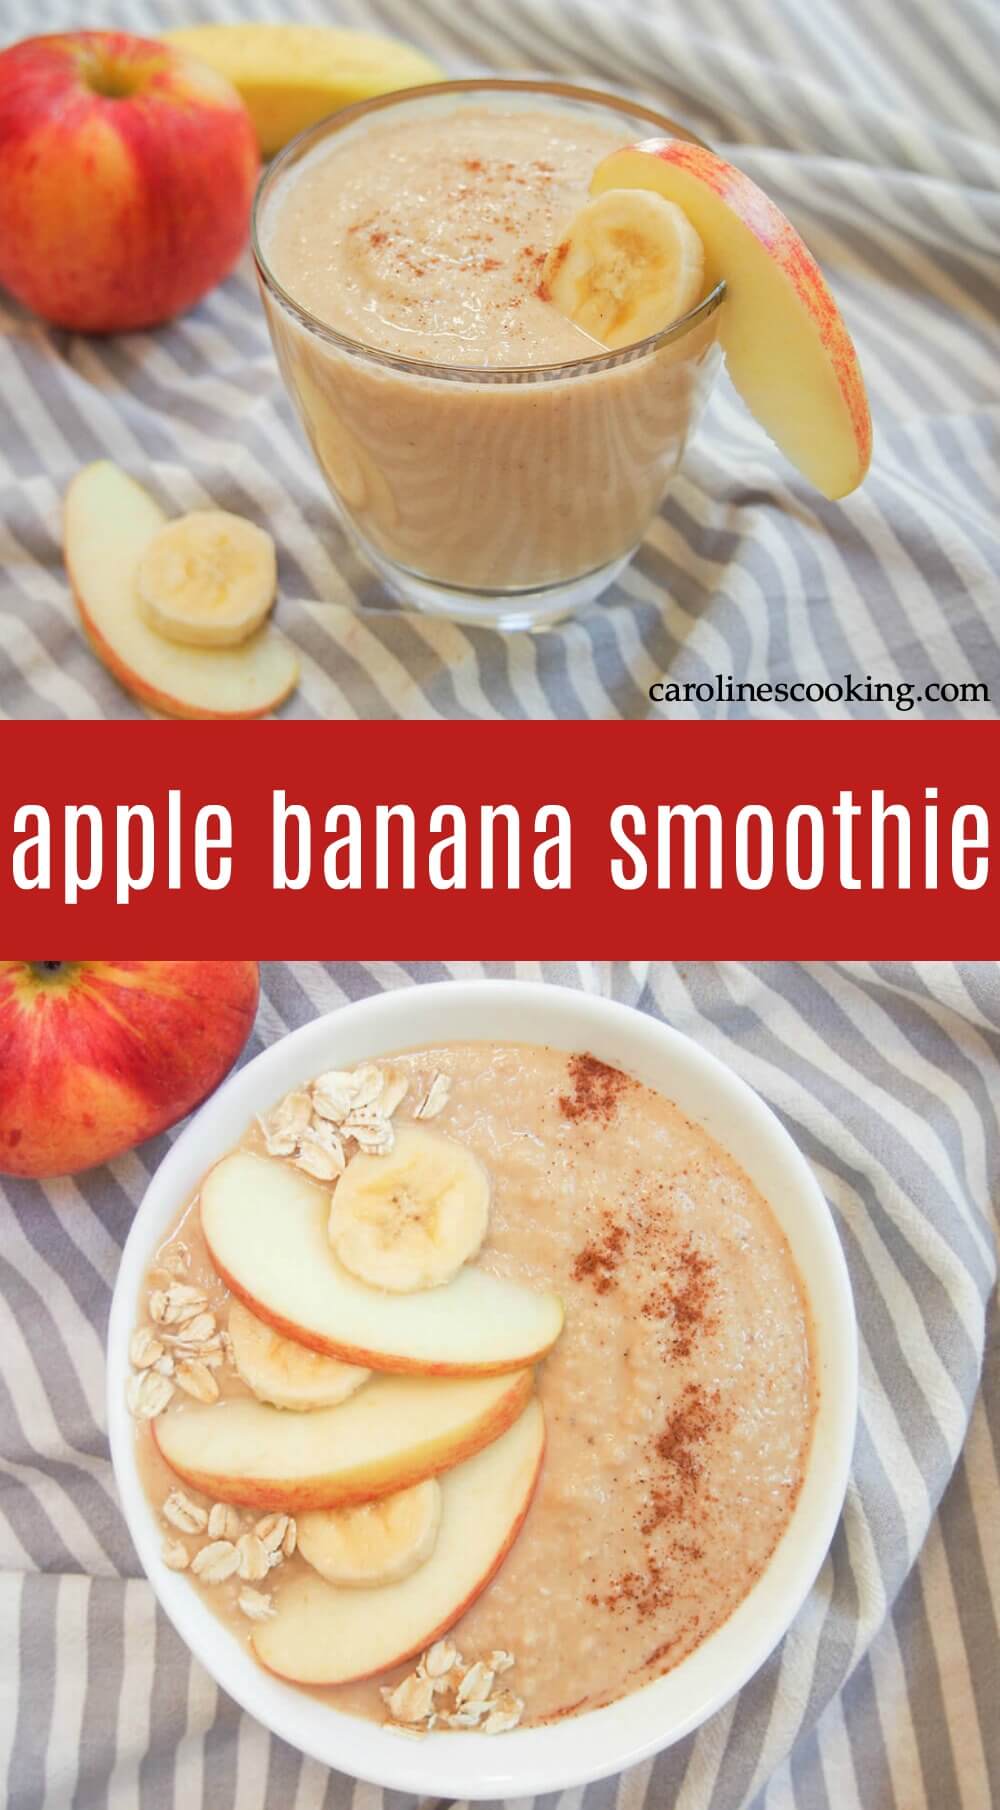 This apple banana smoothie is thick, fruity, and really easy to make using common ingredients.  It's almost like drinking apple pie, but in a much healthier (and quicker) way!  #smoothie #applesmoothie